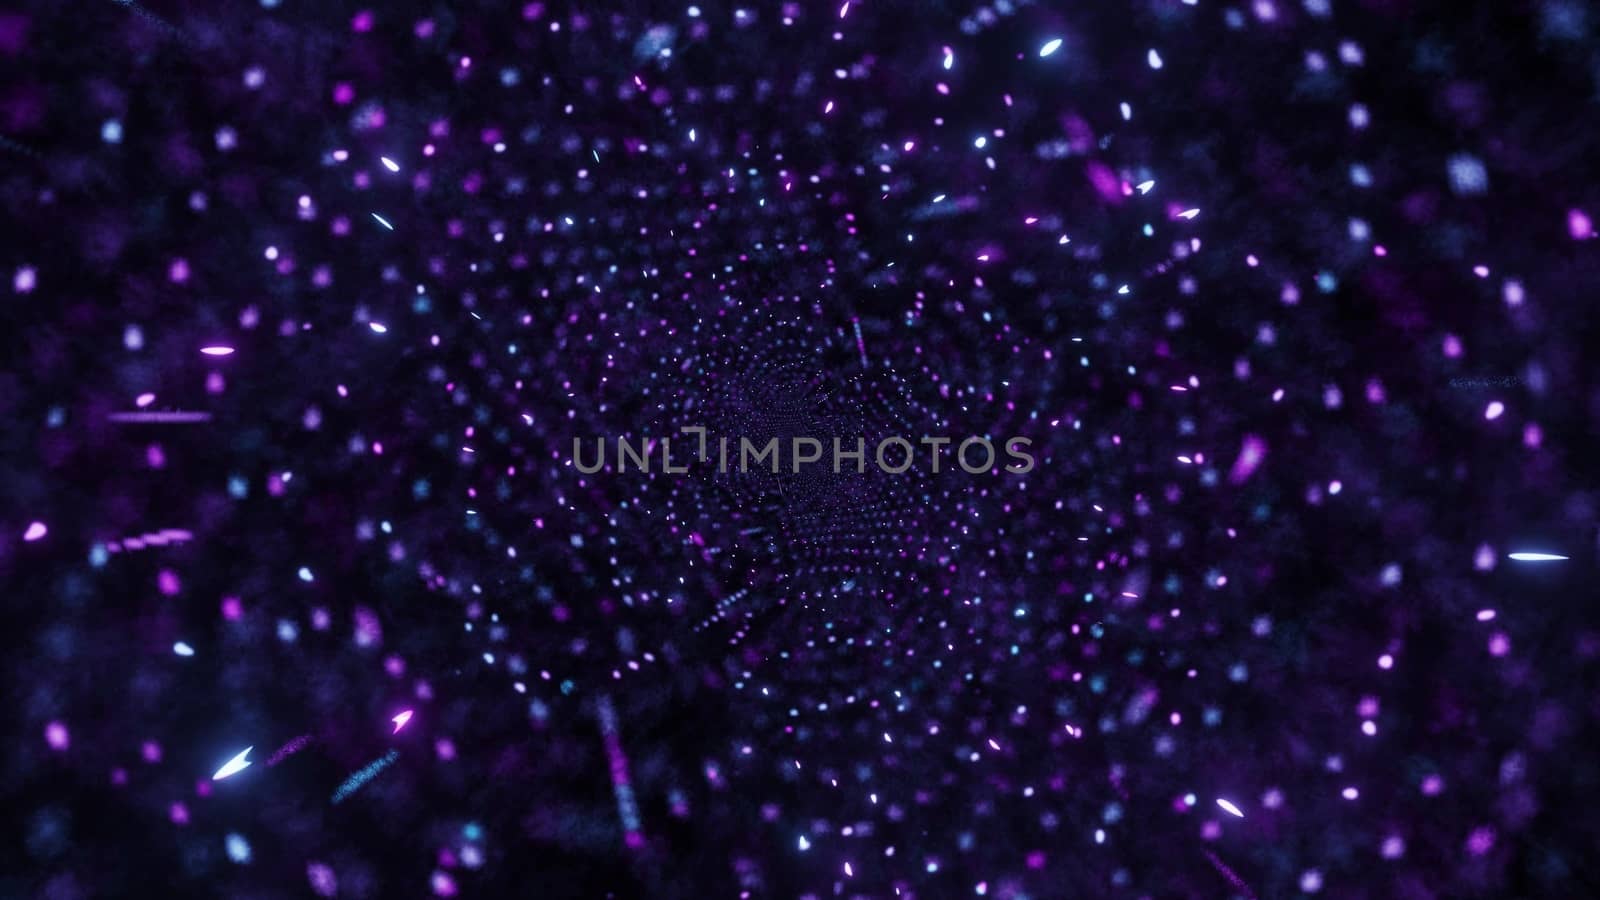 abstract glowing colorful multicolor space galaxy 3d illustration graphic design artwork background wallpaper, creative visuals 3d rendering space galaxy art